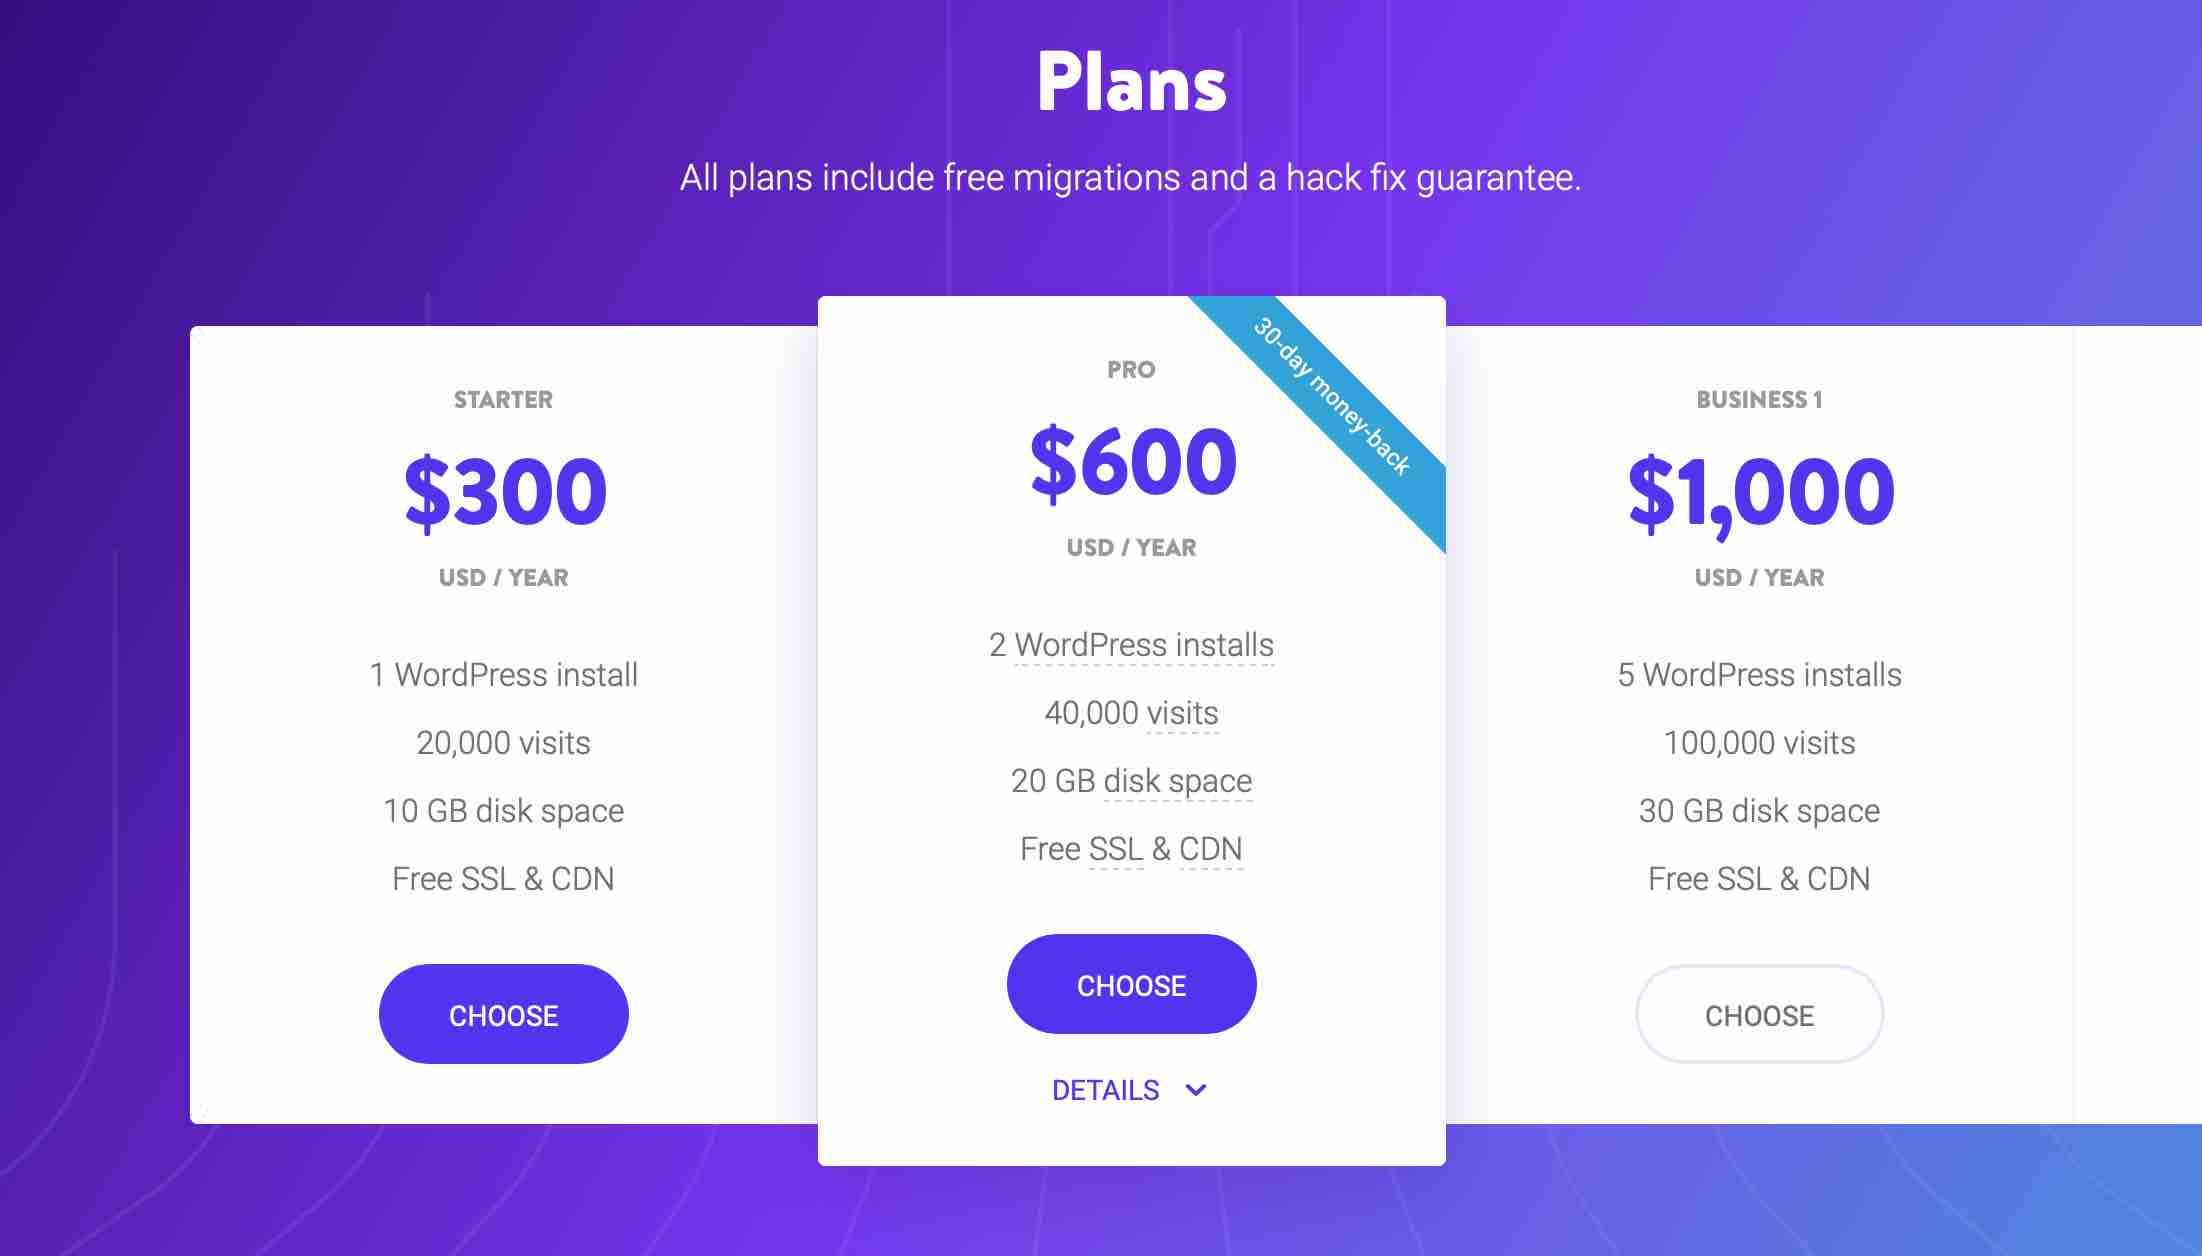 Kinsta plans include free migrations 